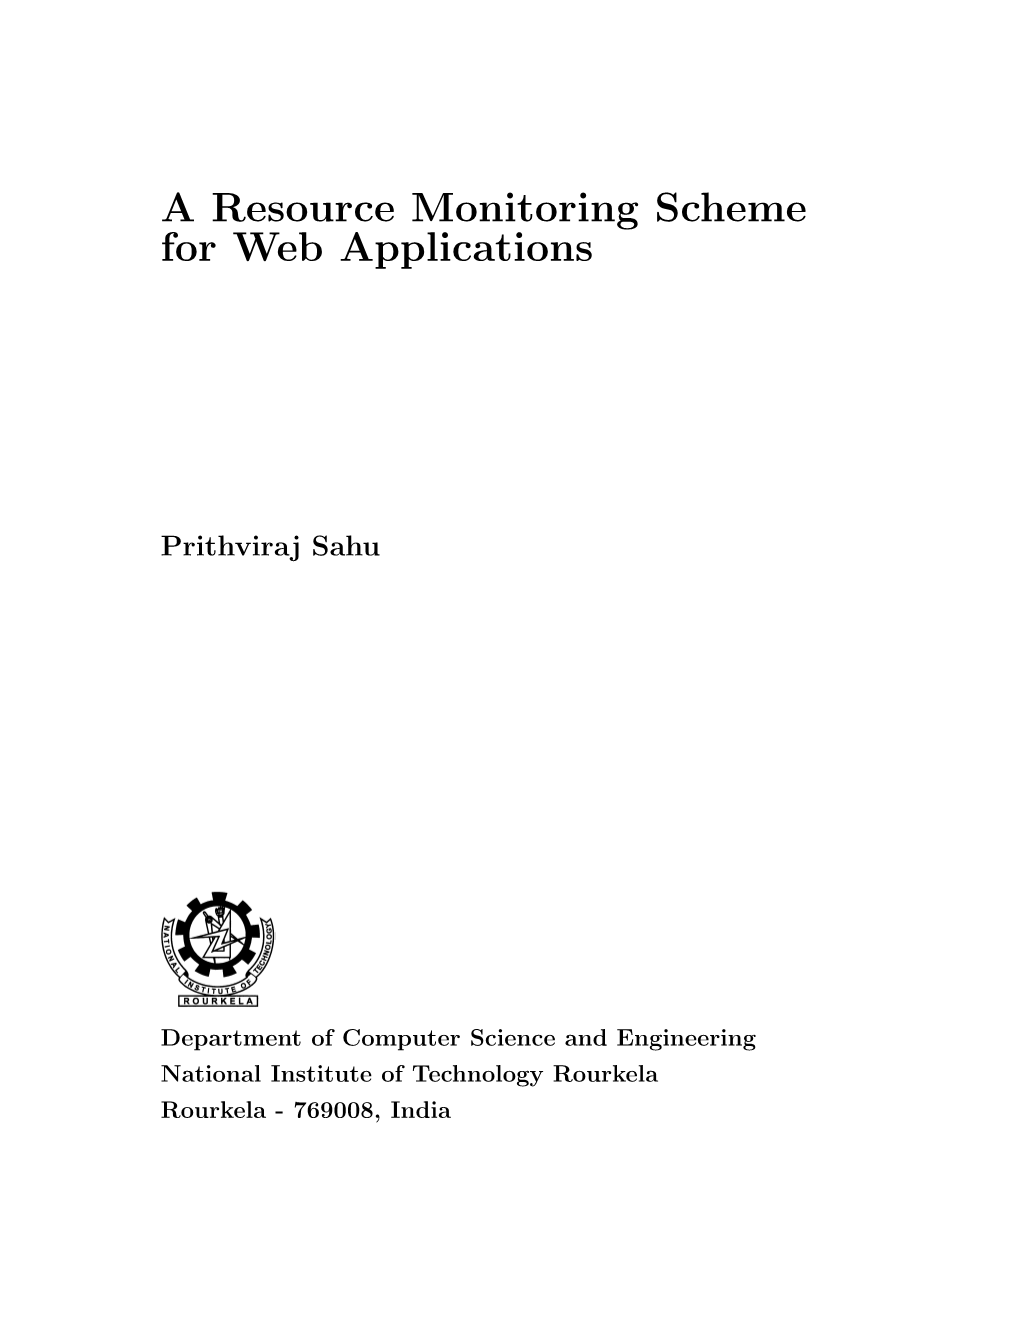 A Resource Monitoring Scheme for Web Applications